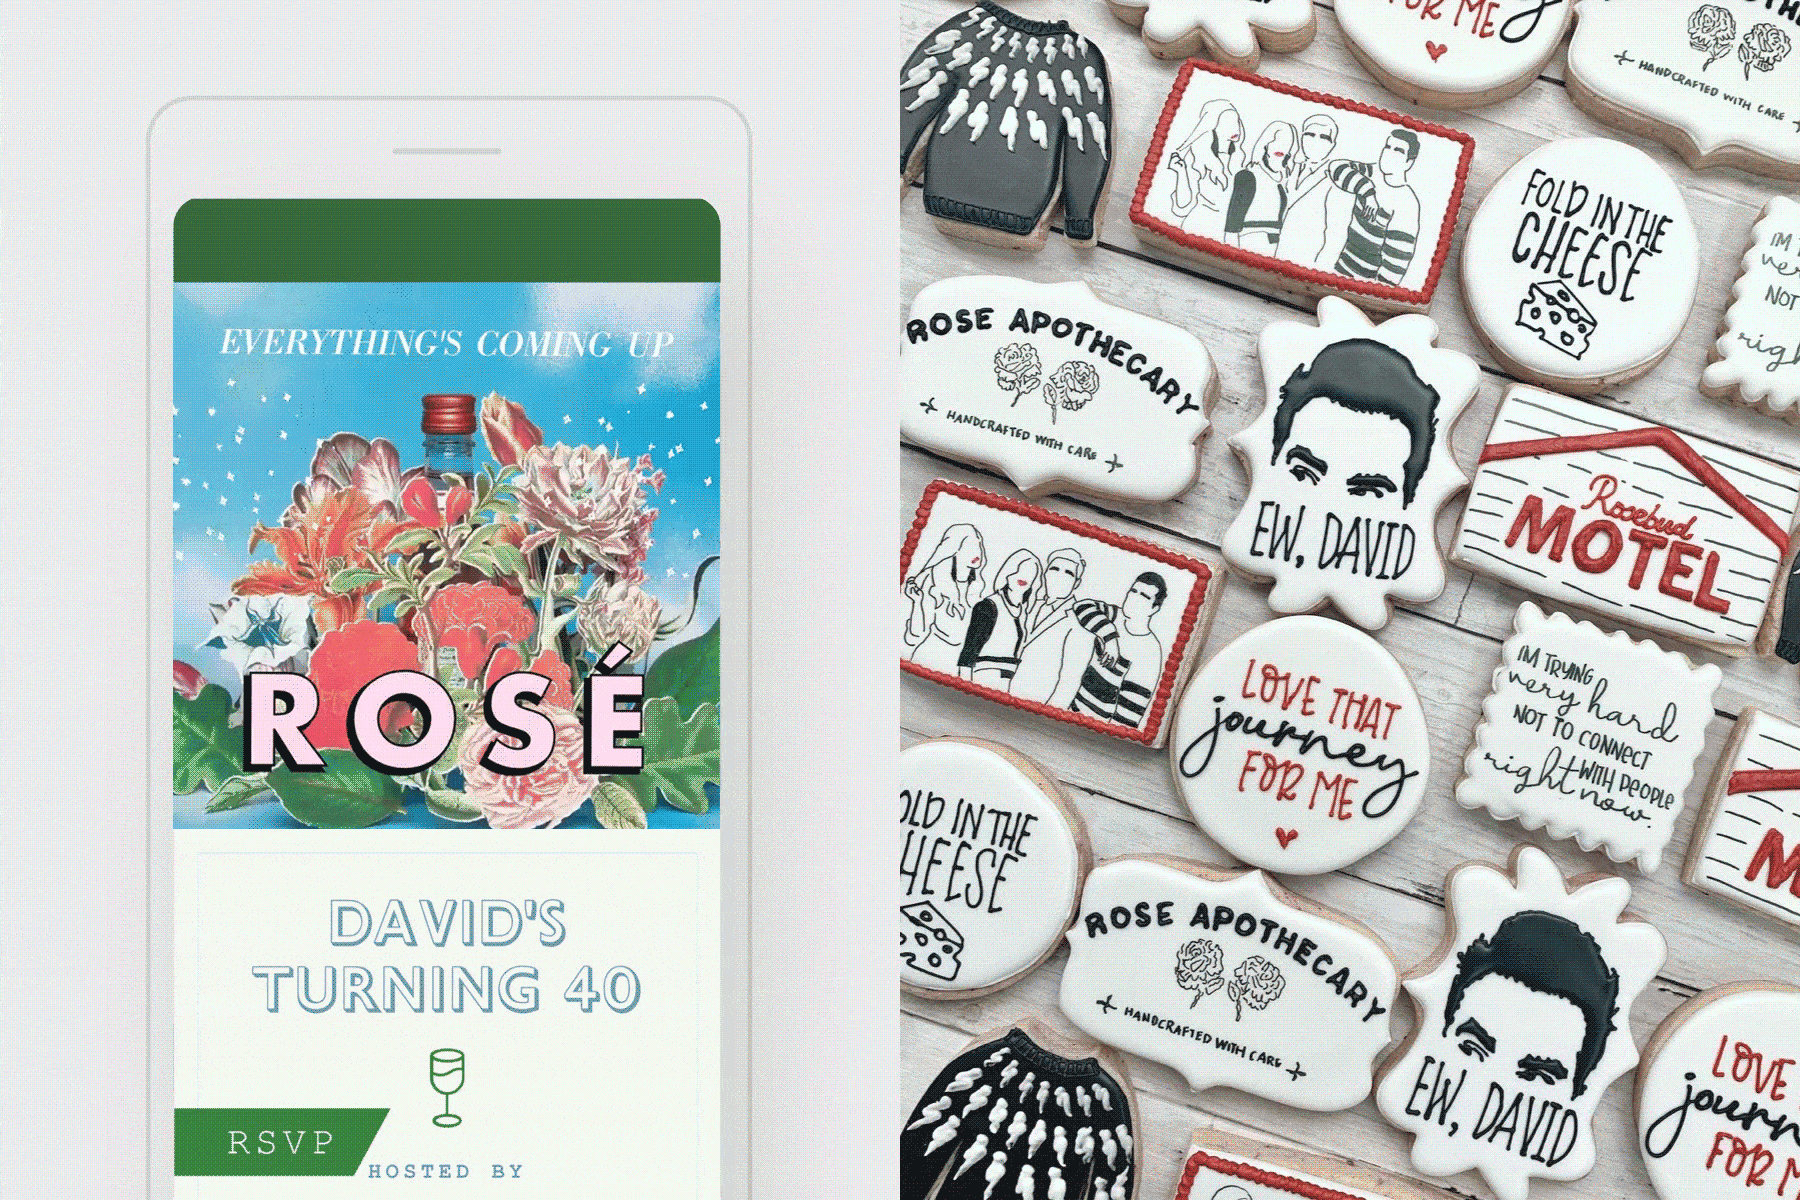 “Coming Up Rosé” Flyer and “Schitt’s Creek” cookies by Siddle Bear Cookies